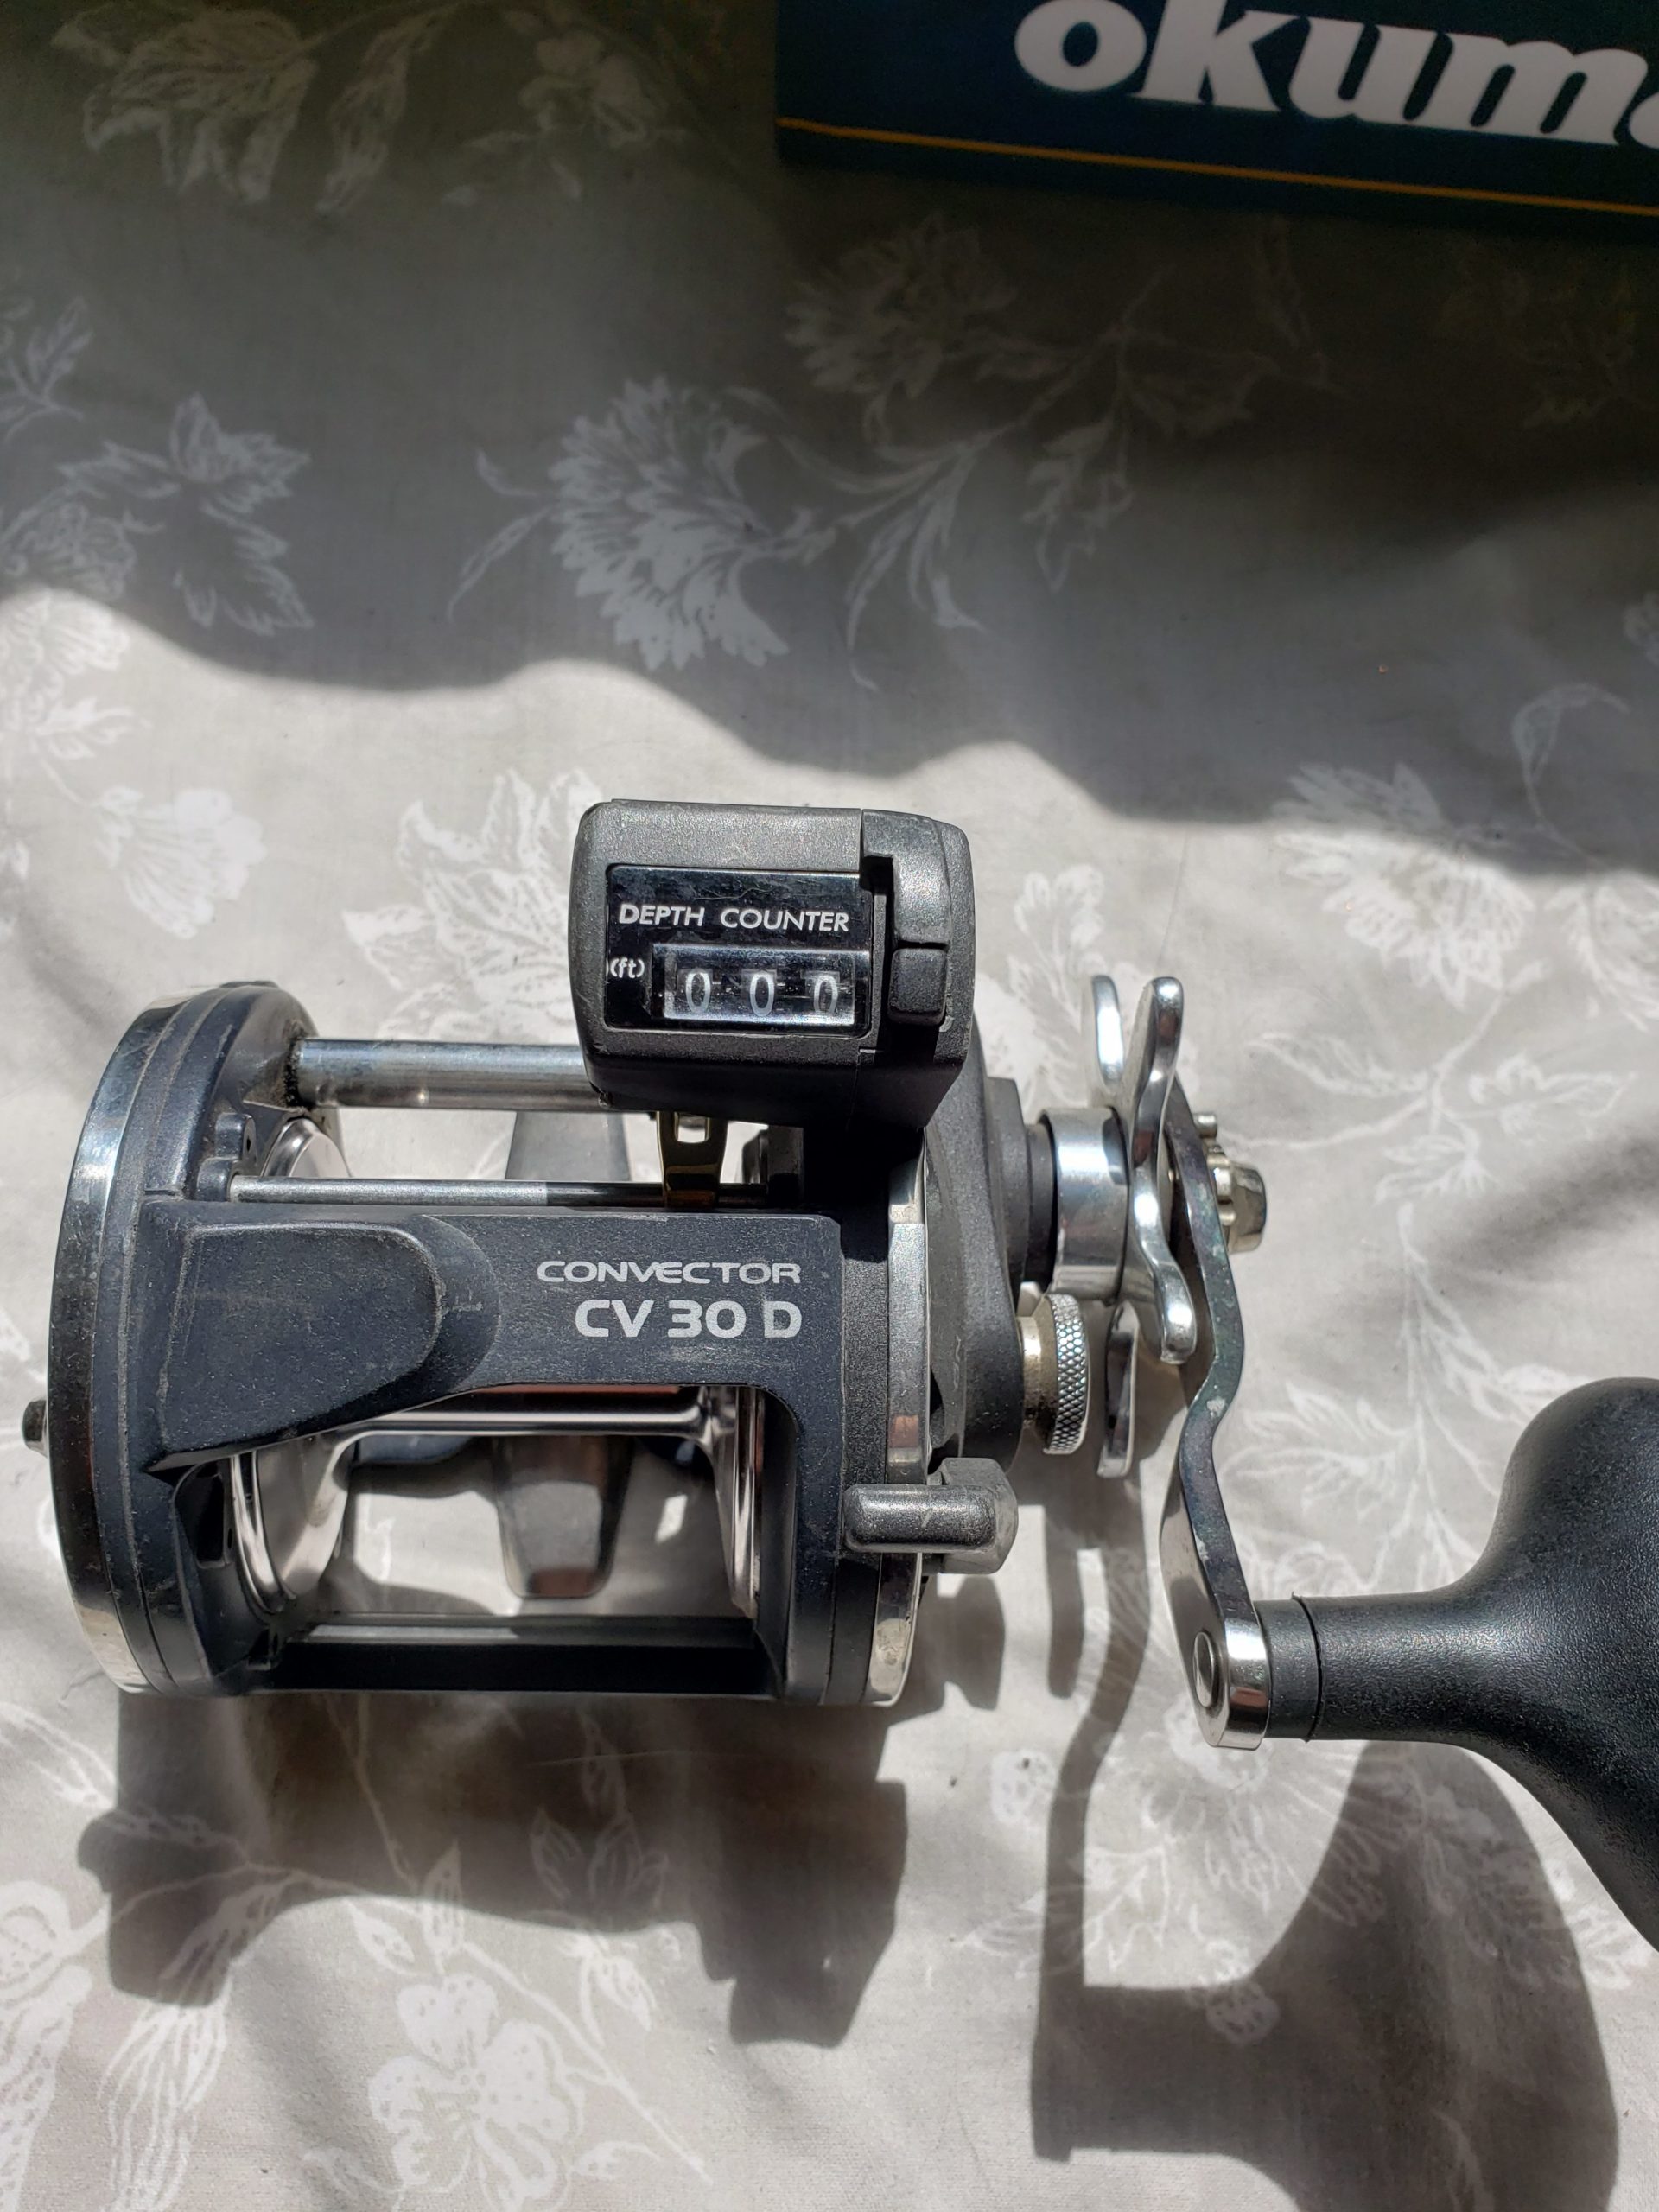 Linecounter reels for sale - Classified Ads - Classified Ads